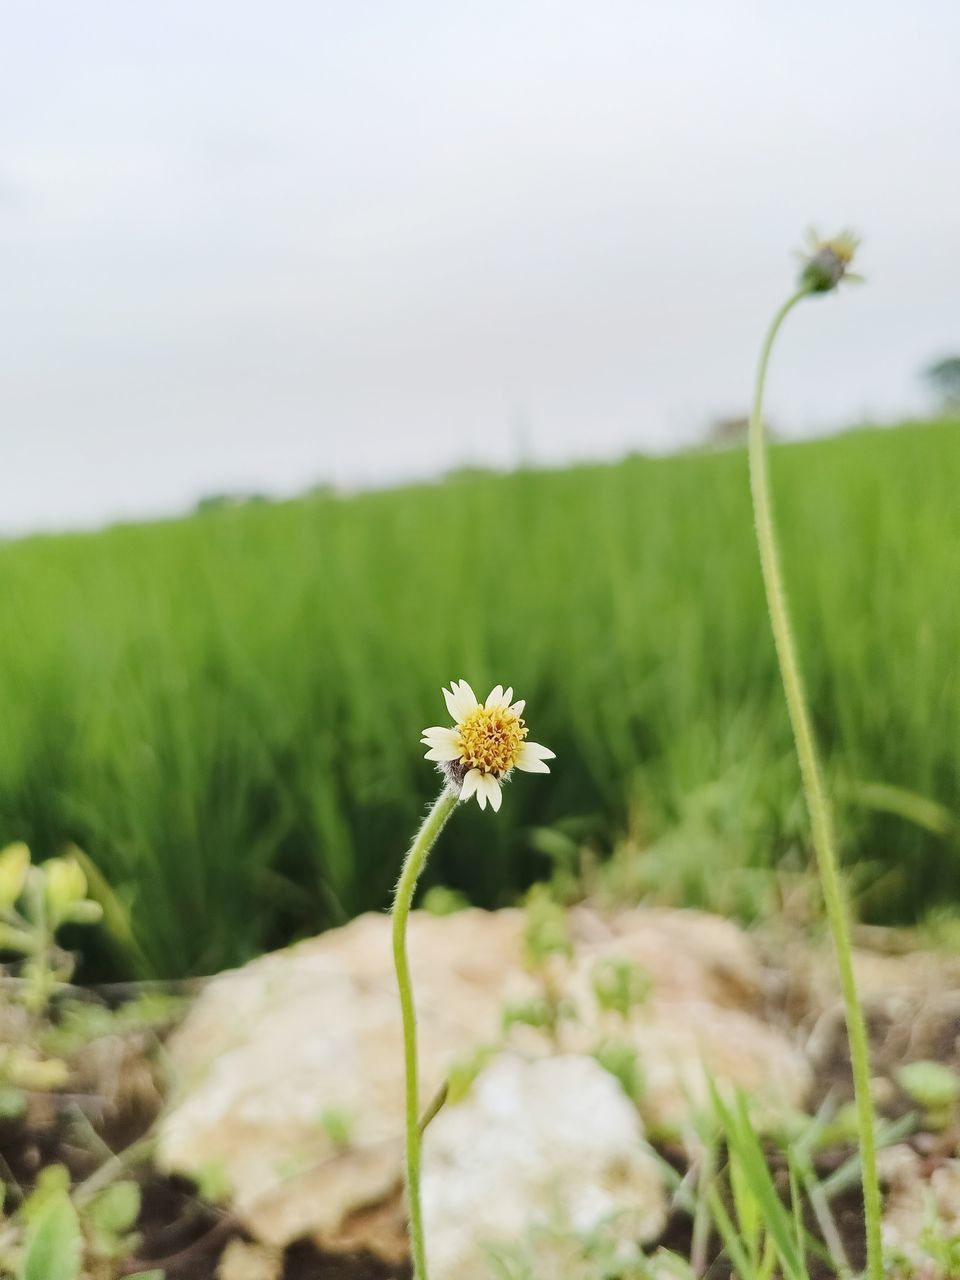 plant, flower, flowering plant, nature, beauty in nature, freshness, green, field, grass, sky, meadow, landscape, growth, grassland, land, prairie, environment, no people, close-up, fragility, rural scene, focus on foreground, day, wildflower, outdoors, selective focus, plain, flower head, tranquility, springtime, summer, non-urban scene, plant stem, scenics - nature, blossom, botany, yellow, food, tranquil scene, rural area, white, daisy, copy space, inflorescence, cloud, agriculture